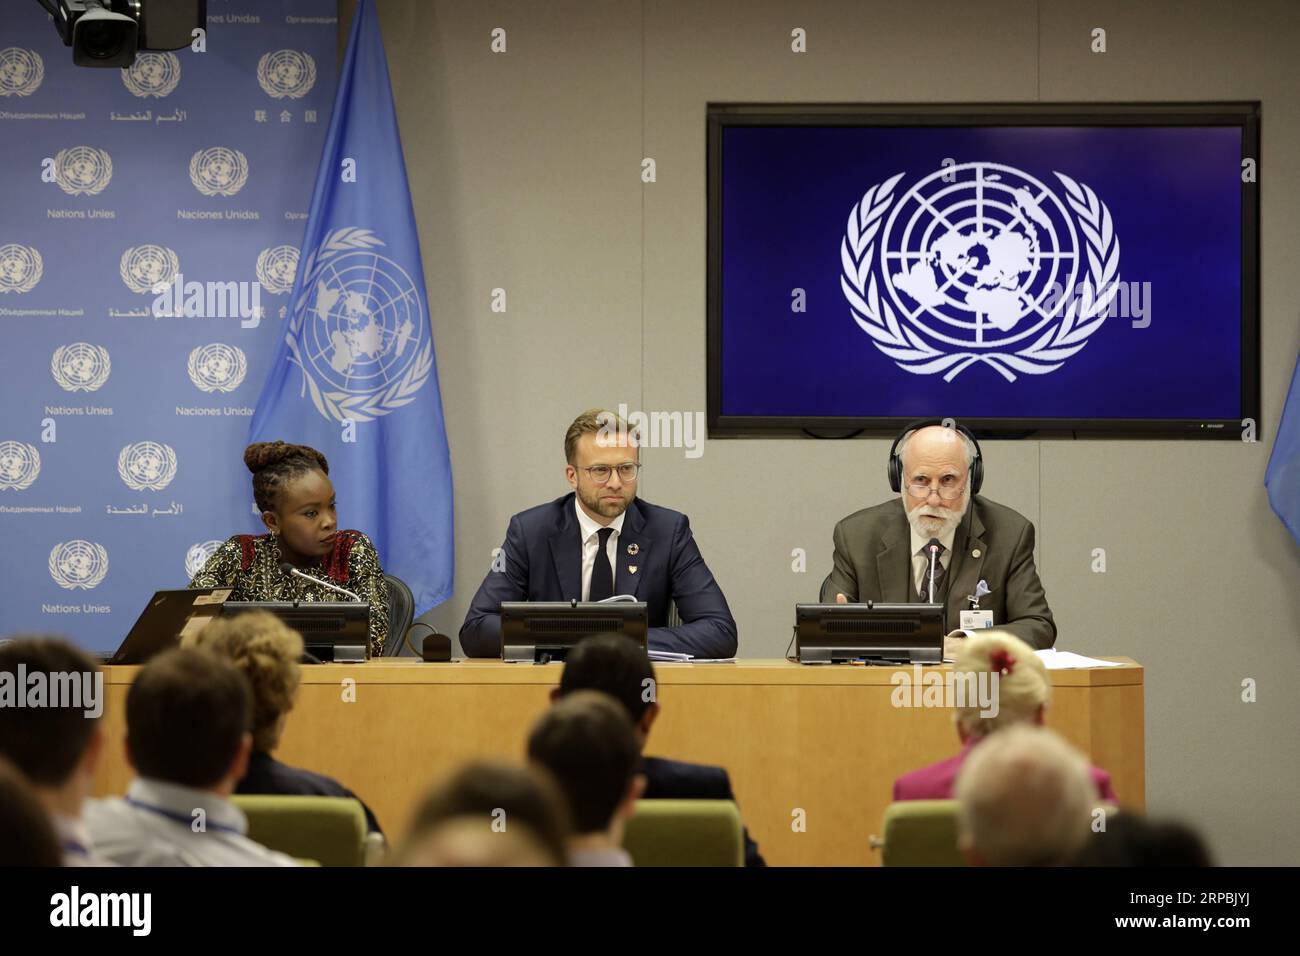 (190610) -- UNITED NATIONS, June 10, 2019 -- (From L to R) Nanjira Sambuli, Digital Equality Advocacy Manager for the World Wide Web Foundation, Nikolai Astrup, Norway s Minister of Digitalization, and Vinton Cerf, Chief Internet Evangelist at Google, attend a press briefing on the report of the High-level Panel on Digital Cooperation, at the UN headquarters in New York, on June 10, 2019. An expert group appointed by the United Nations called on governments, the private sector and civil society, in its first report released Monday, to work together urgently to maximize the benefits and minimiz Stock Photo